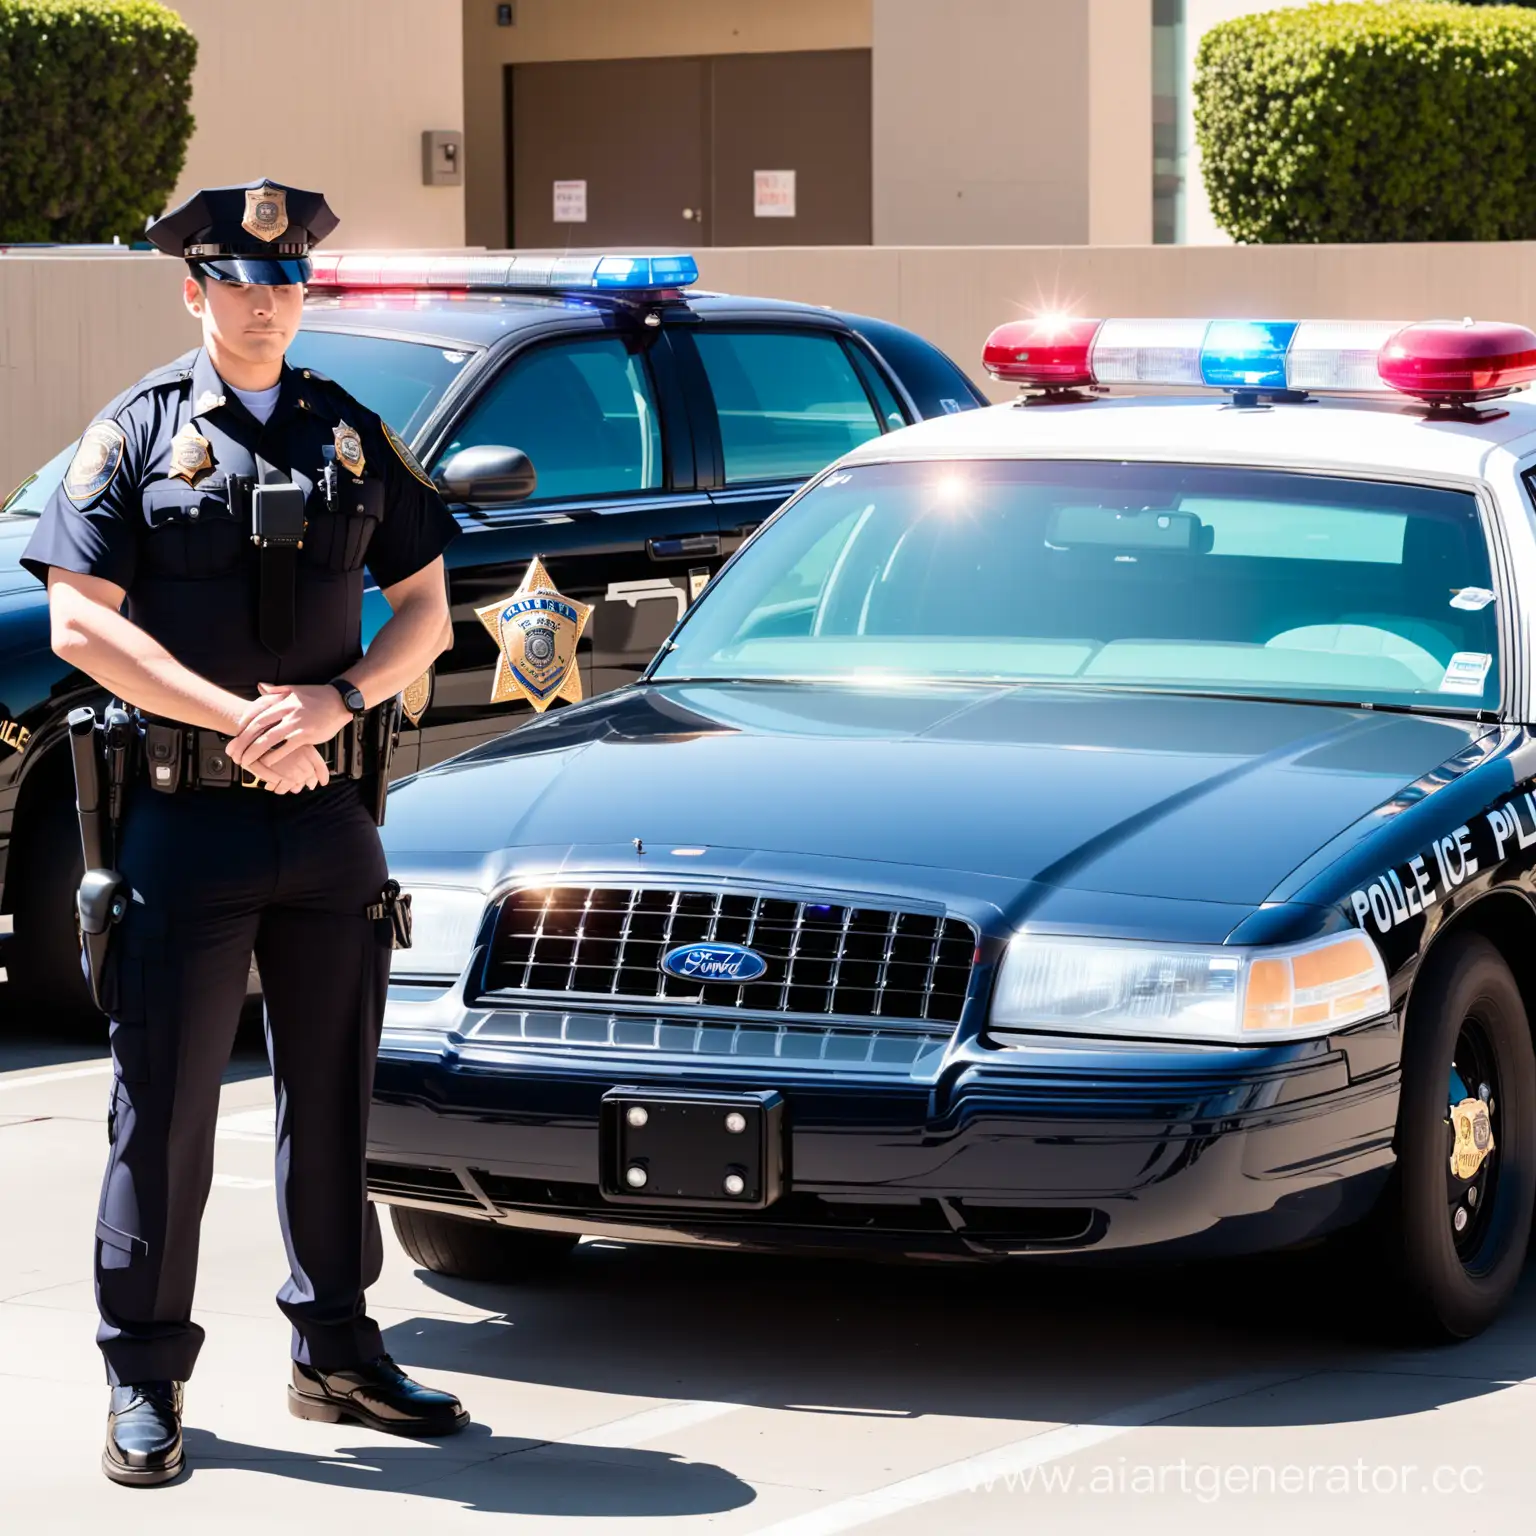 LAPD-Officer-Standing-by-Ford-Crown-Victoria-Police-Car-in-Los-Angeles